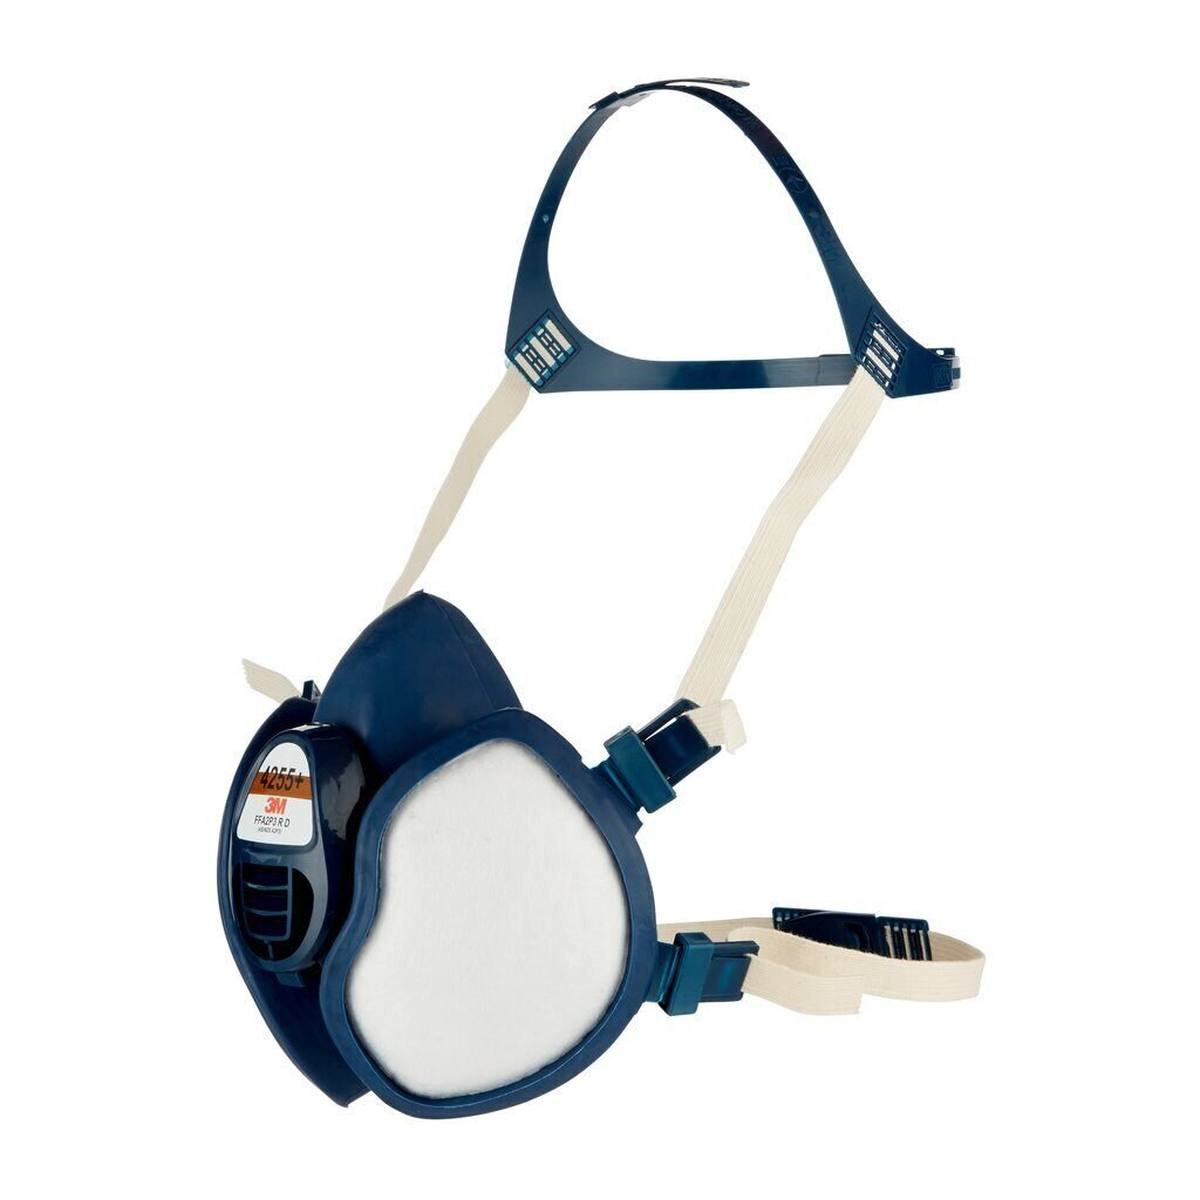 3M 4255+ respirator FFA2P3RD against organic gases and vapors as well as particles up to 30 times the limit value